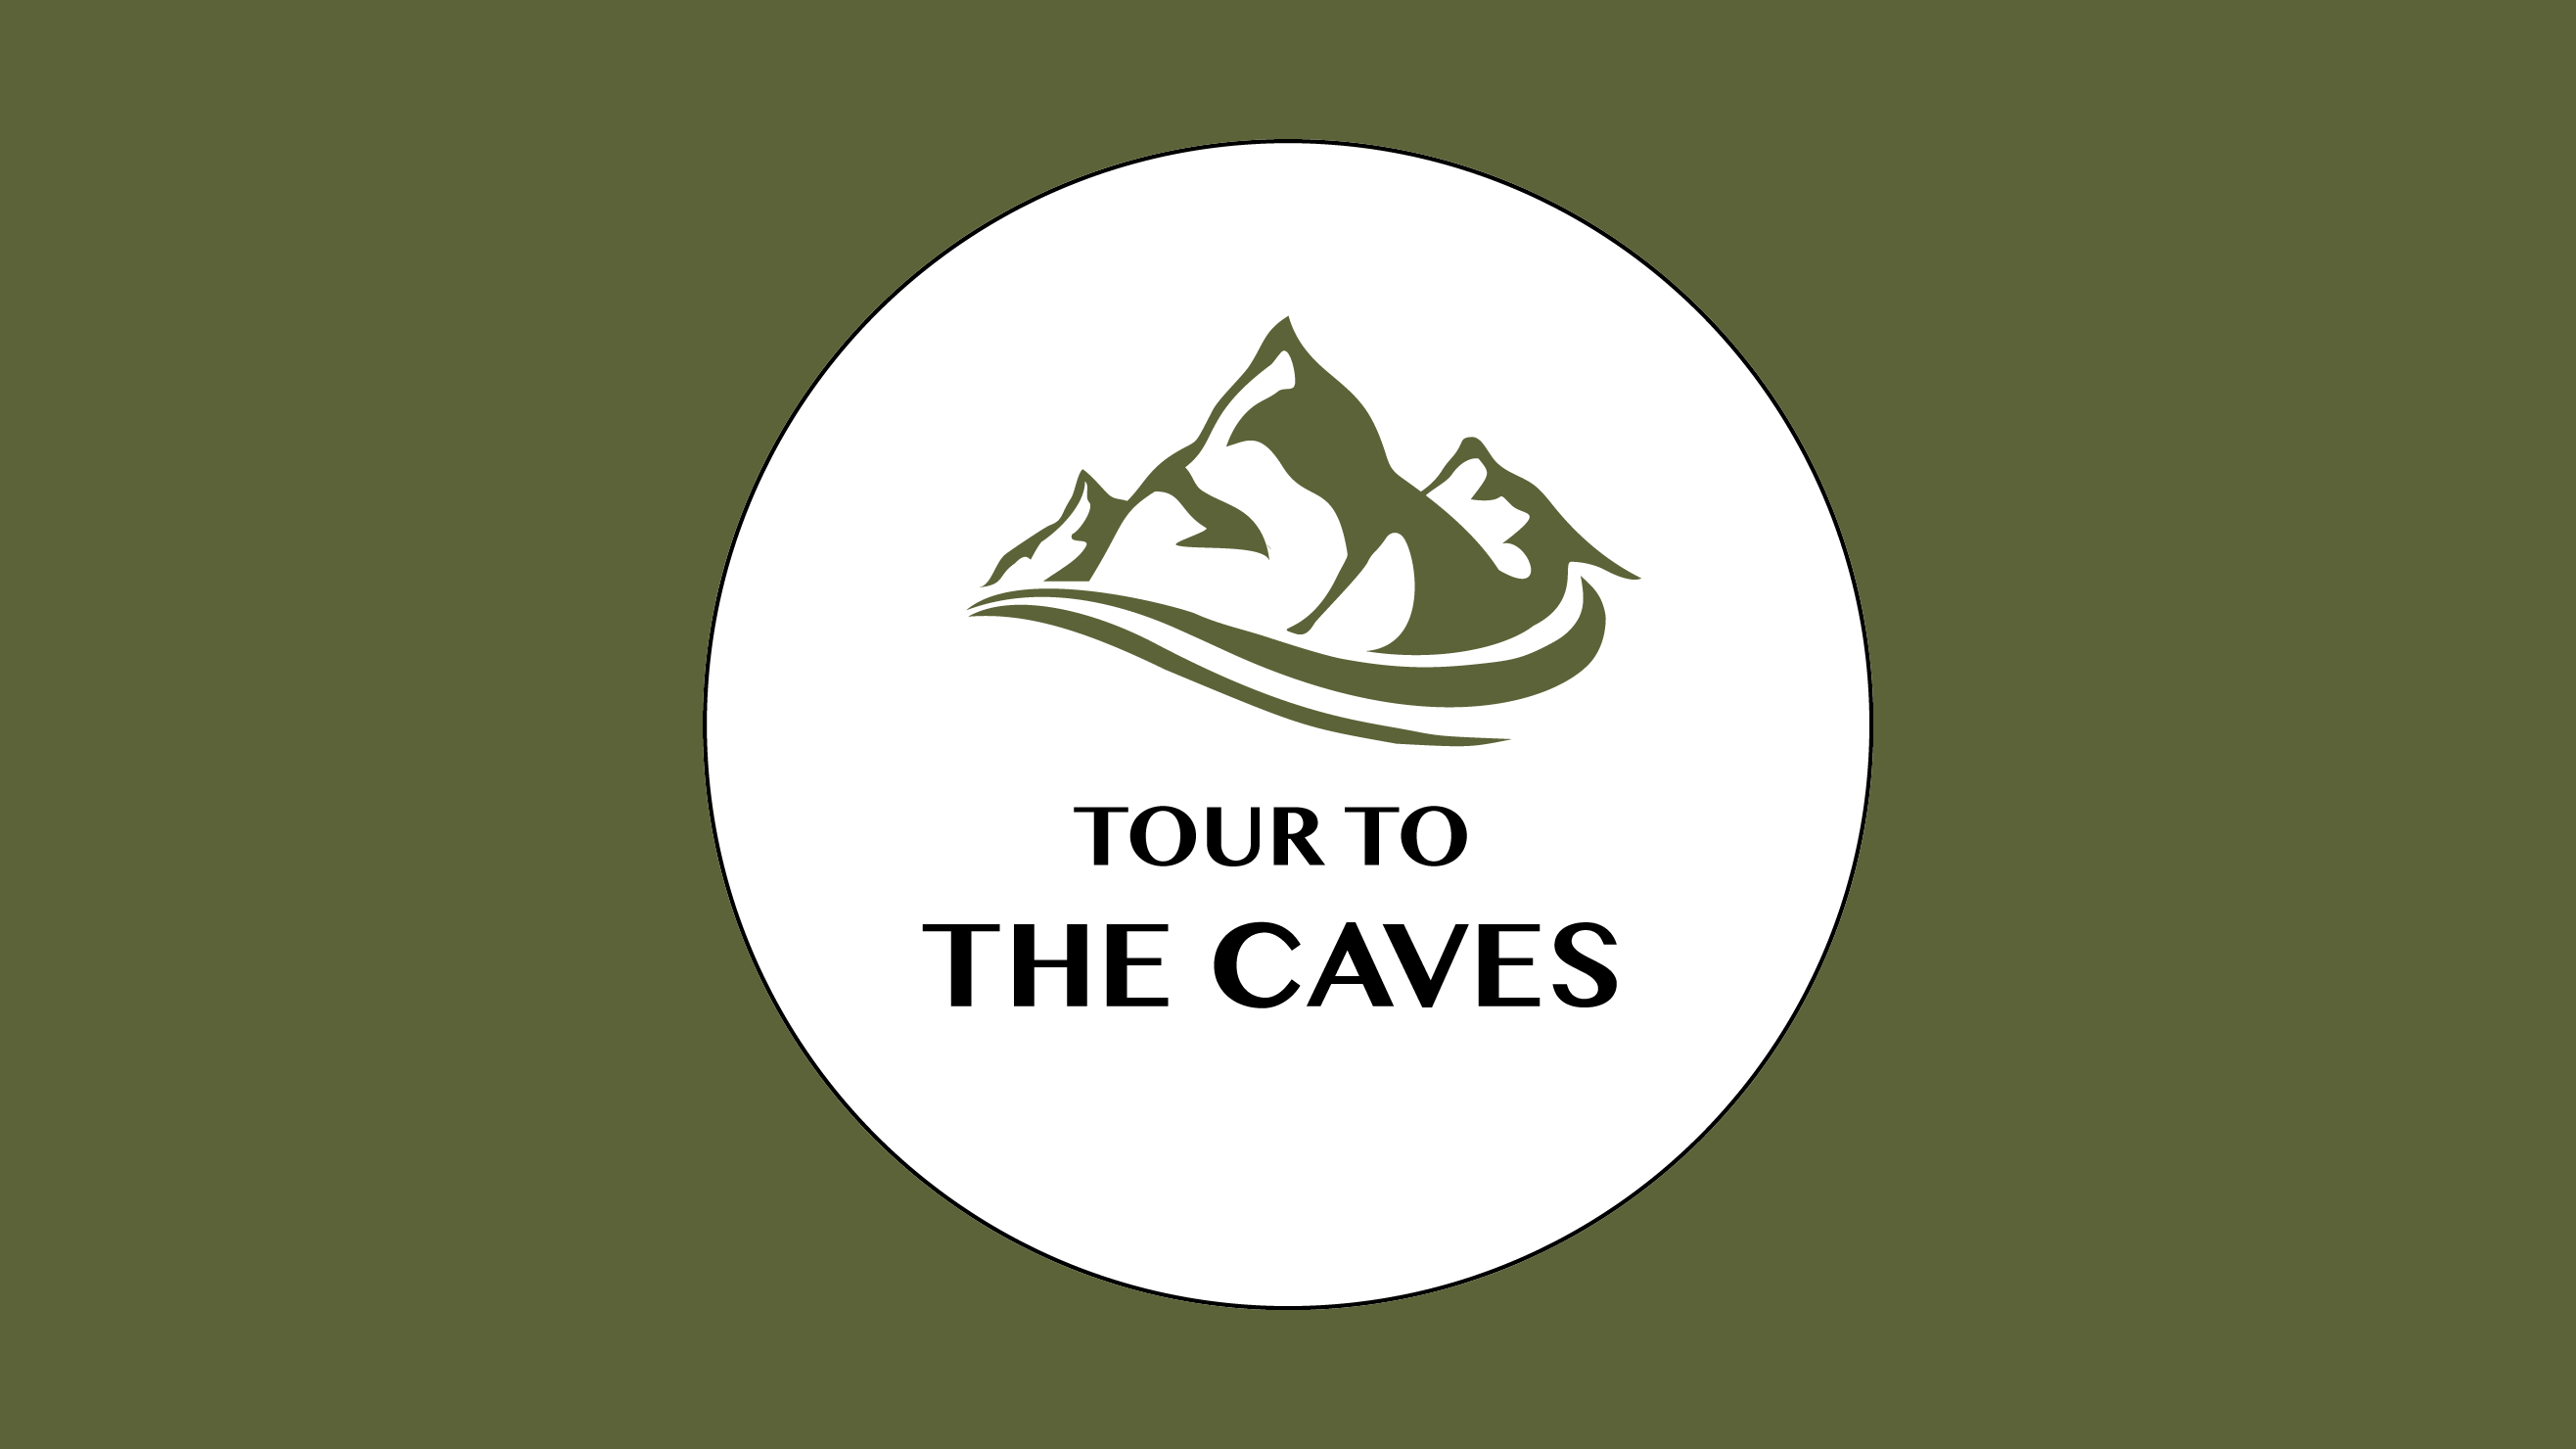 Tour to the Caves